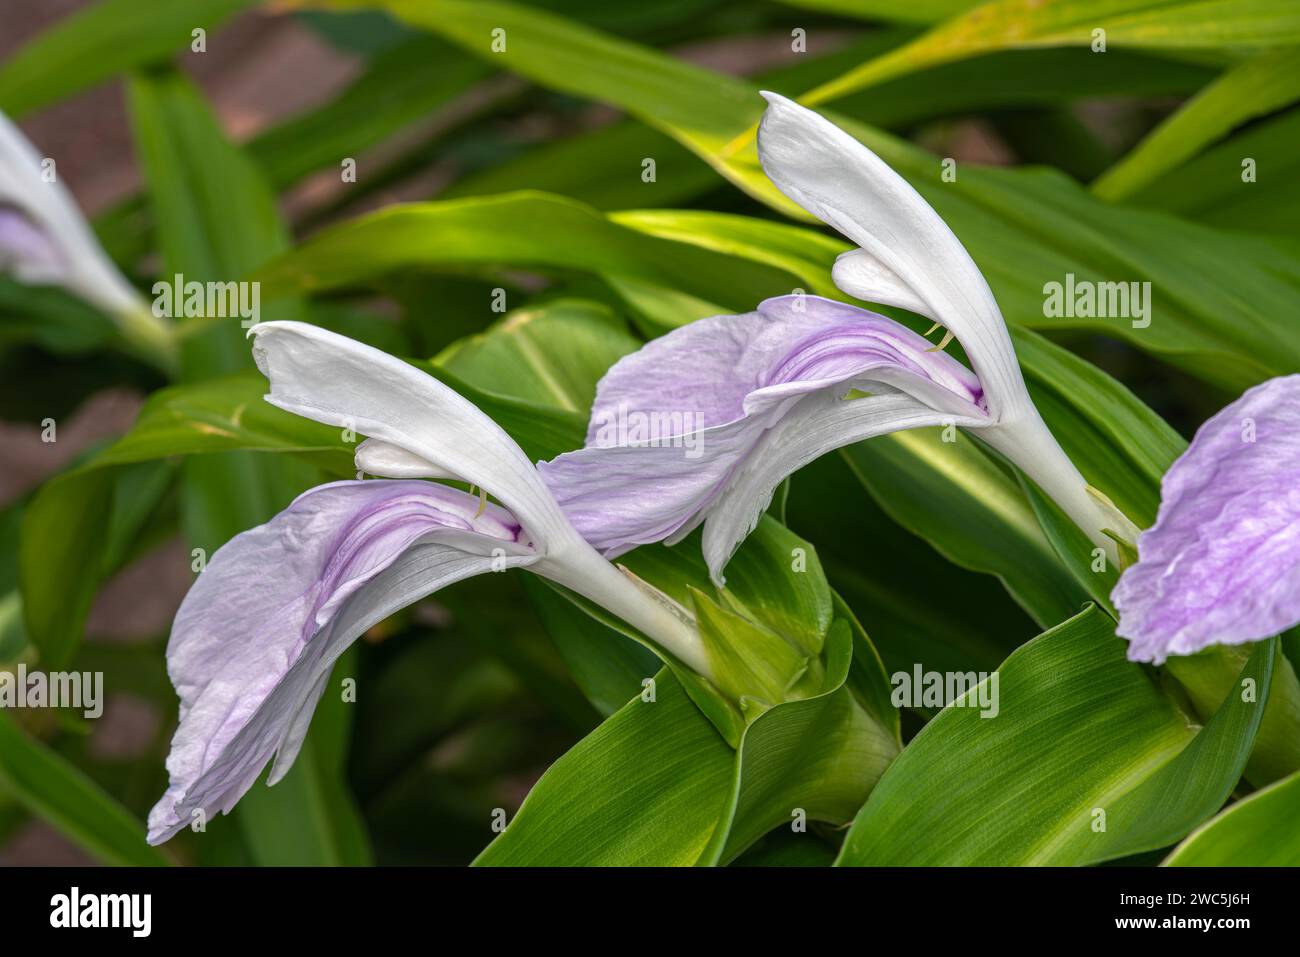 Roscoea purpurea a summer autumn fall flowering plant with a purple summertime flower commonly known as Bhordaya, stock photo image Stock Photo